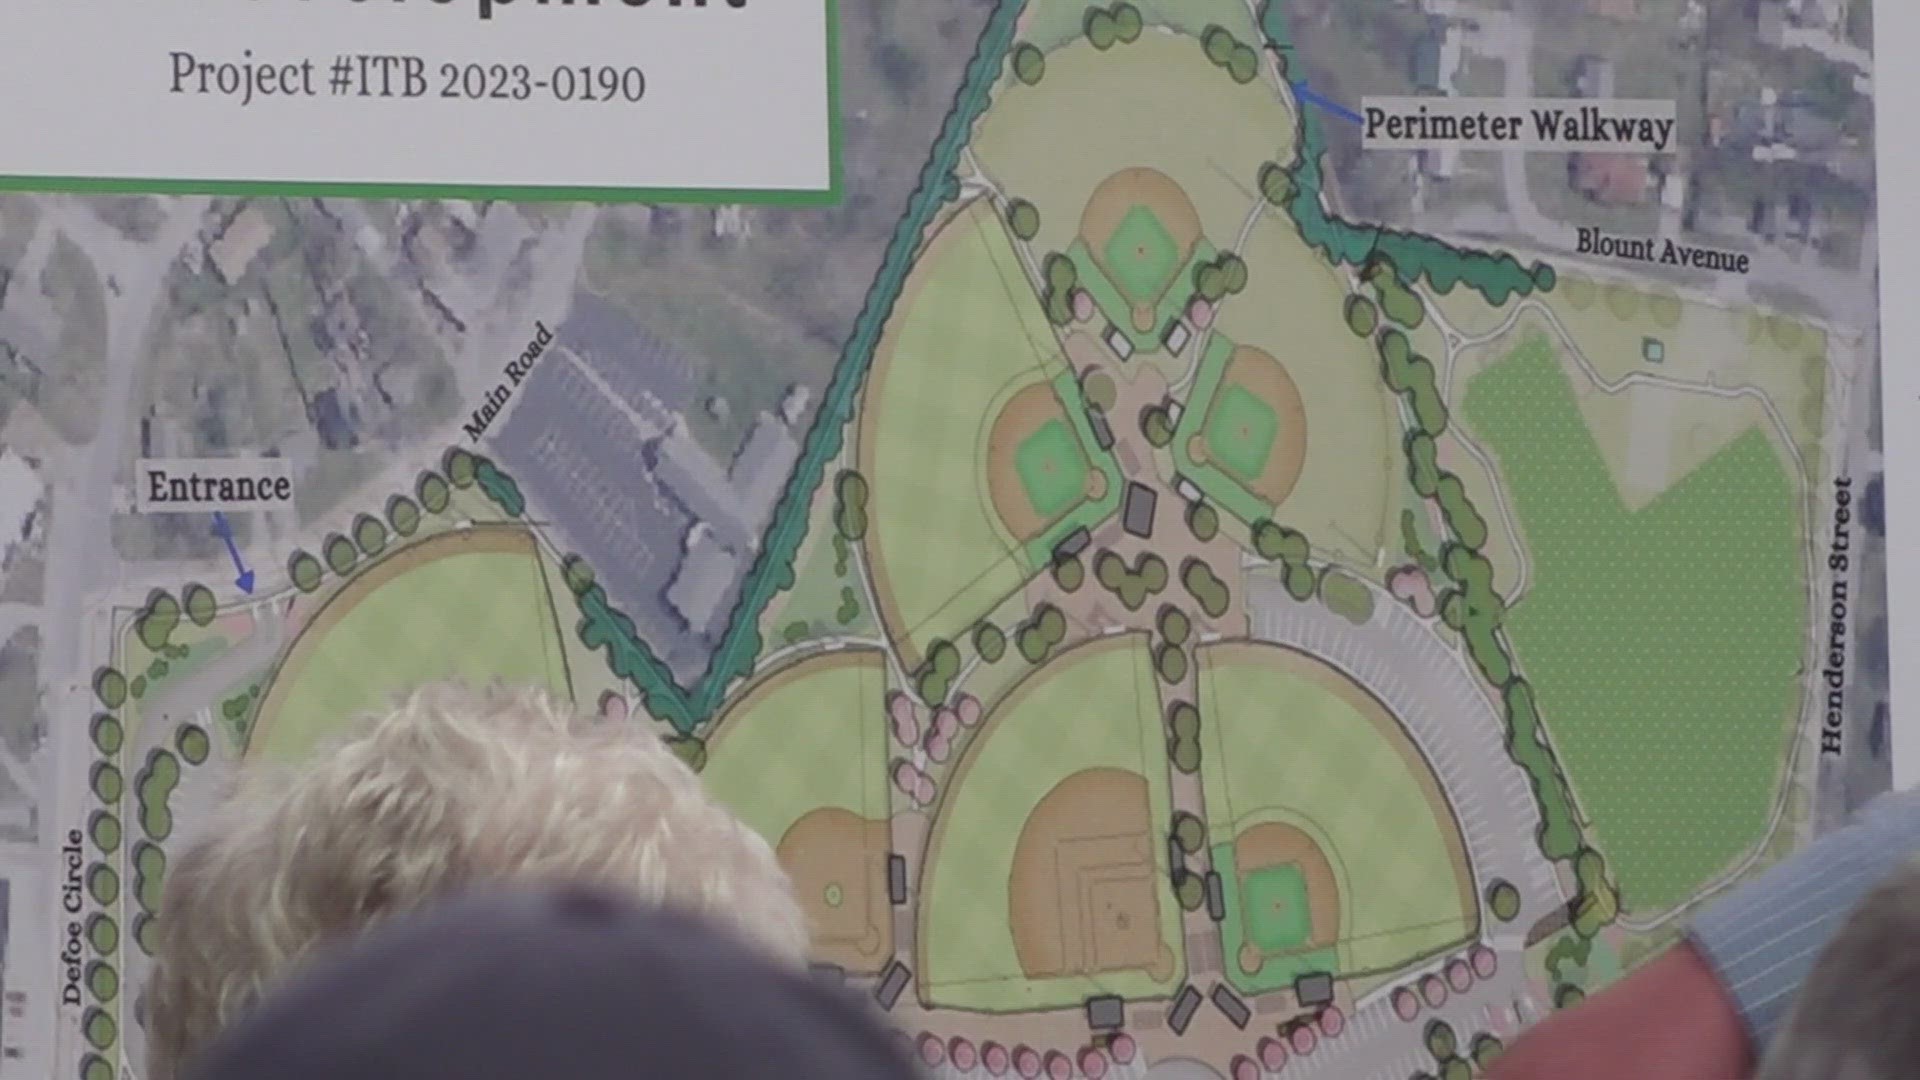 The plan involves upgrading fields for schools and community youth leagues, while also addressing stormwater issues.